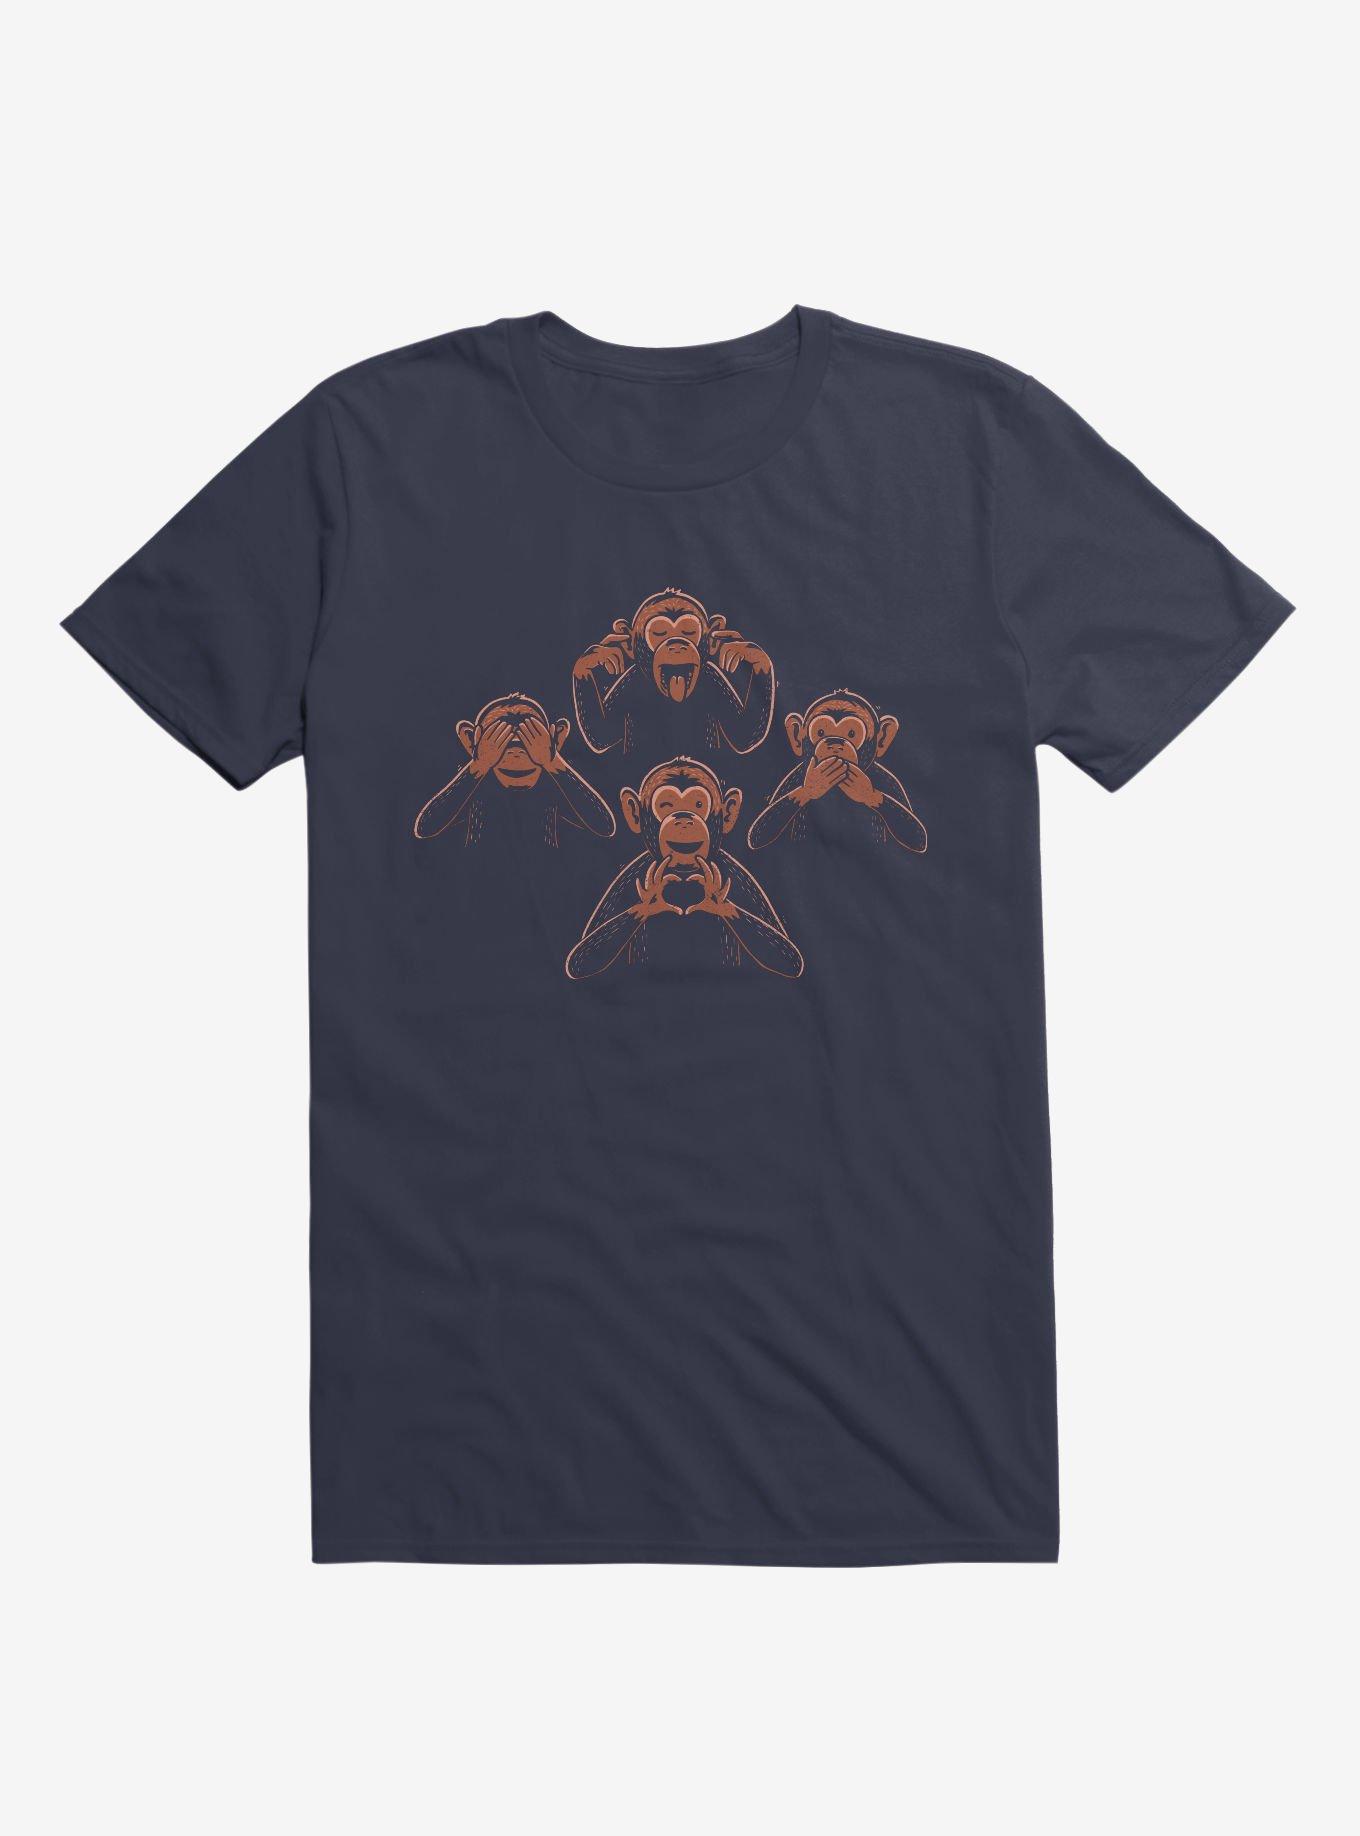 Three Wise Monkey And One Lover T-Shirt, NAVY, hi-res